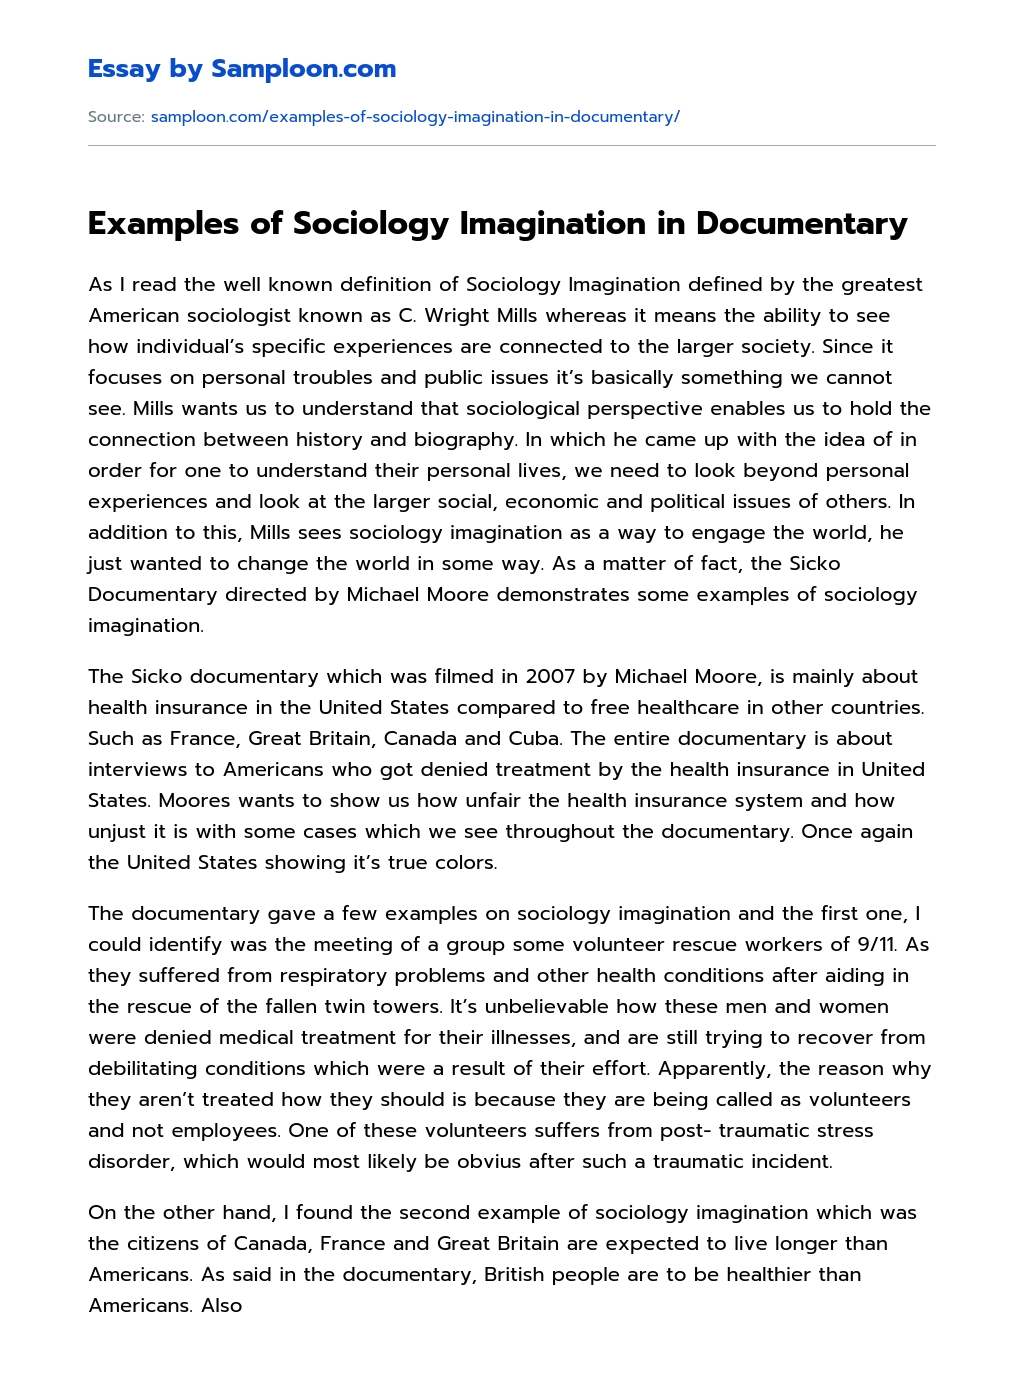 Examples of Sociology Imagination in Documentary essay